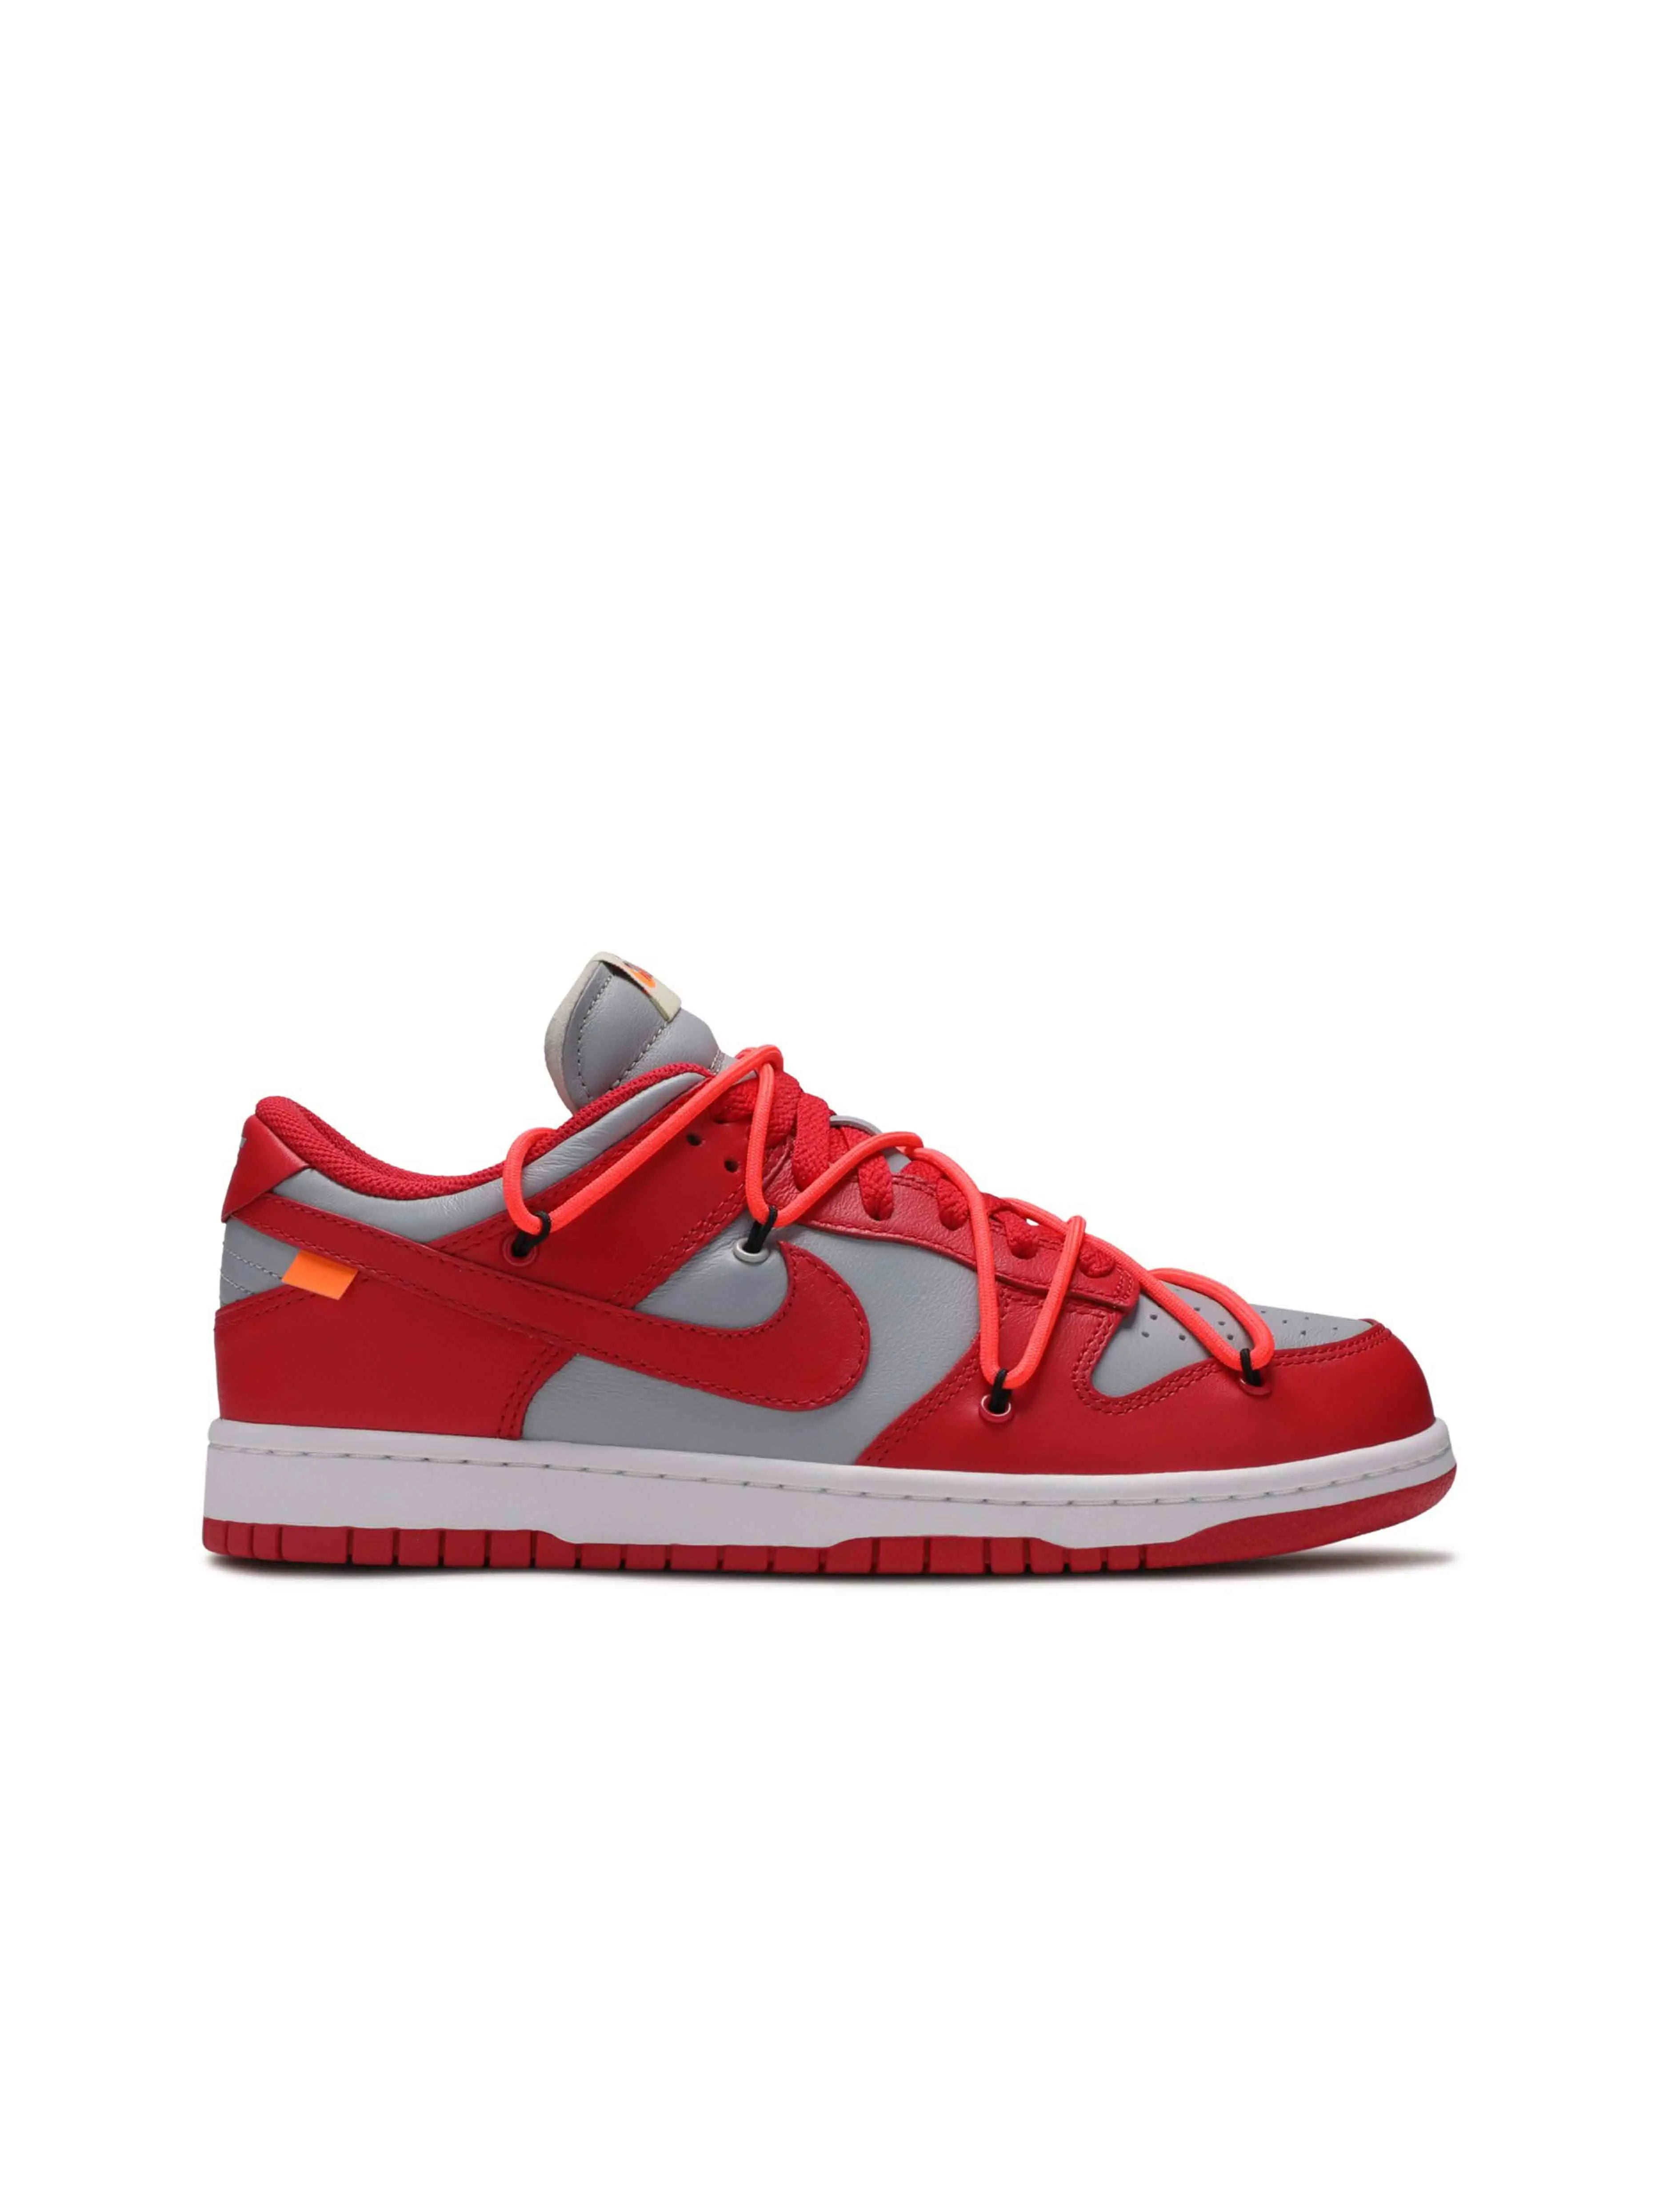 Nike Dunk Low Off-White University Red in Auckland, New Zealand - – Prior